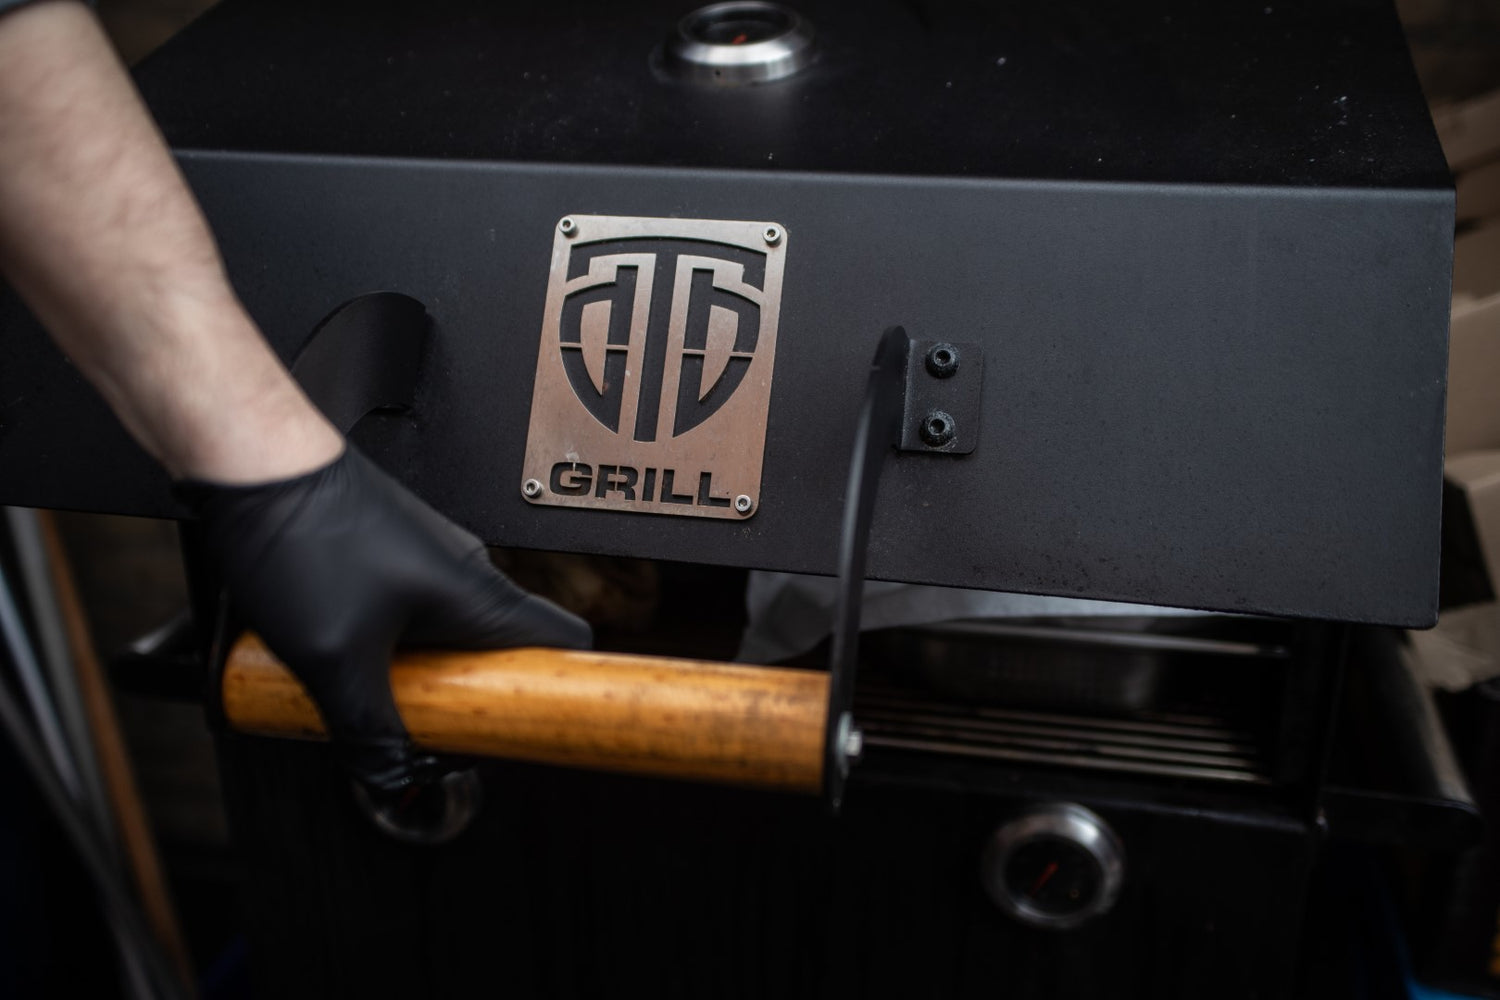 DTB Grill